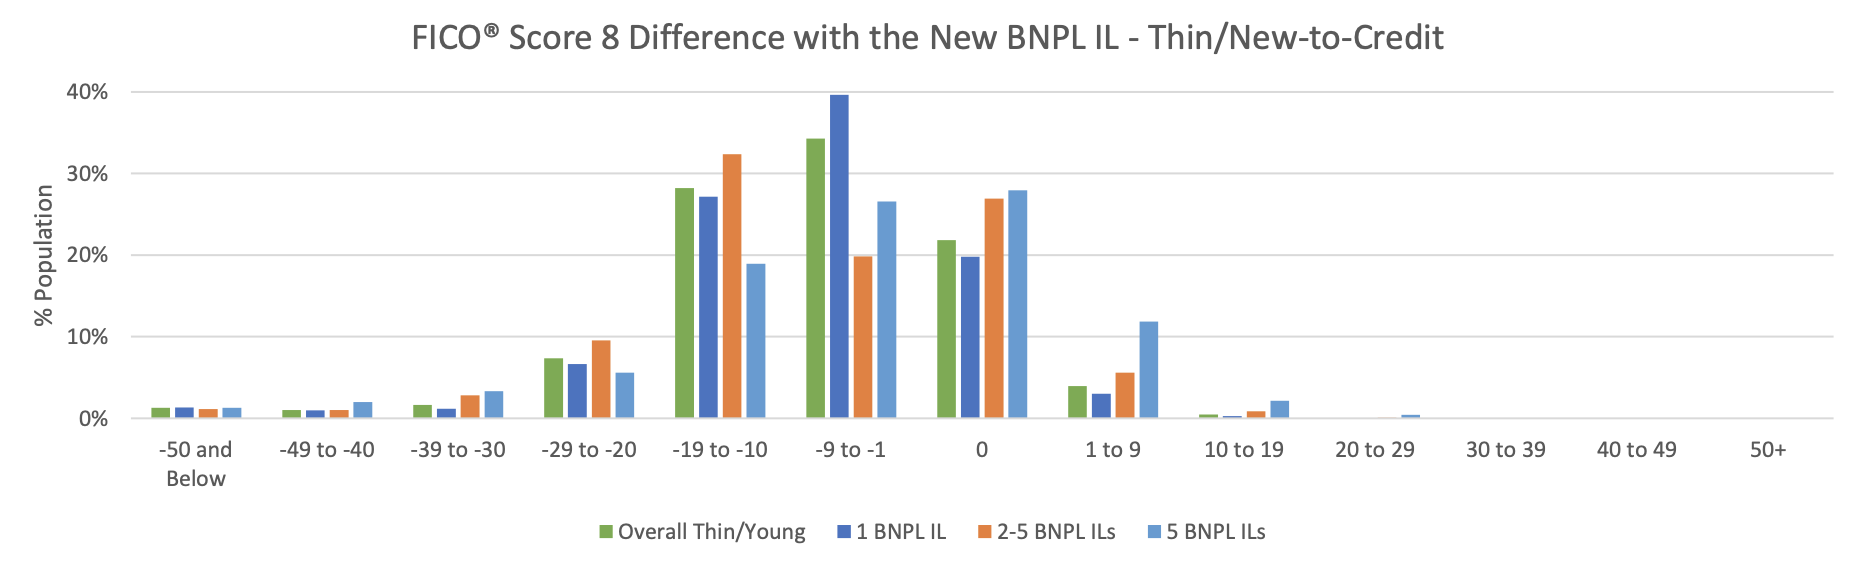 Distribution of FICO® Score 8 Difference with the New BNPL IL – Thin/New-to-Credit as of September 2020